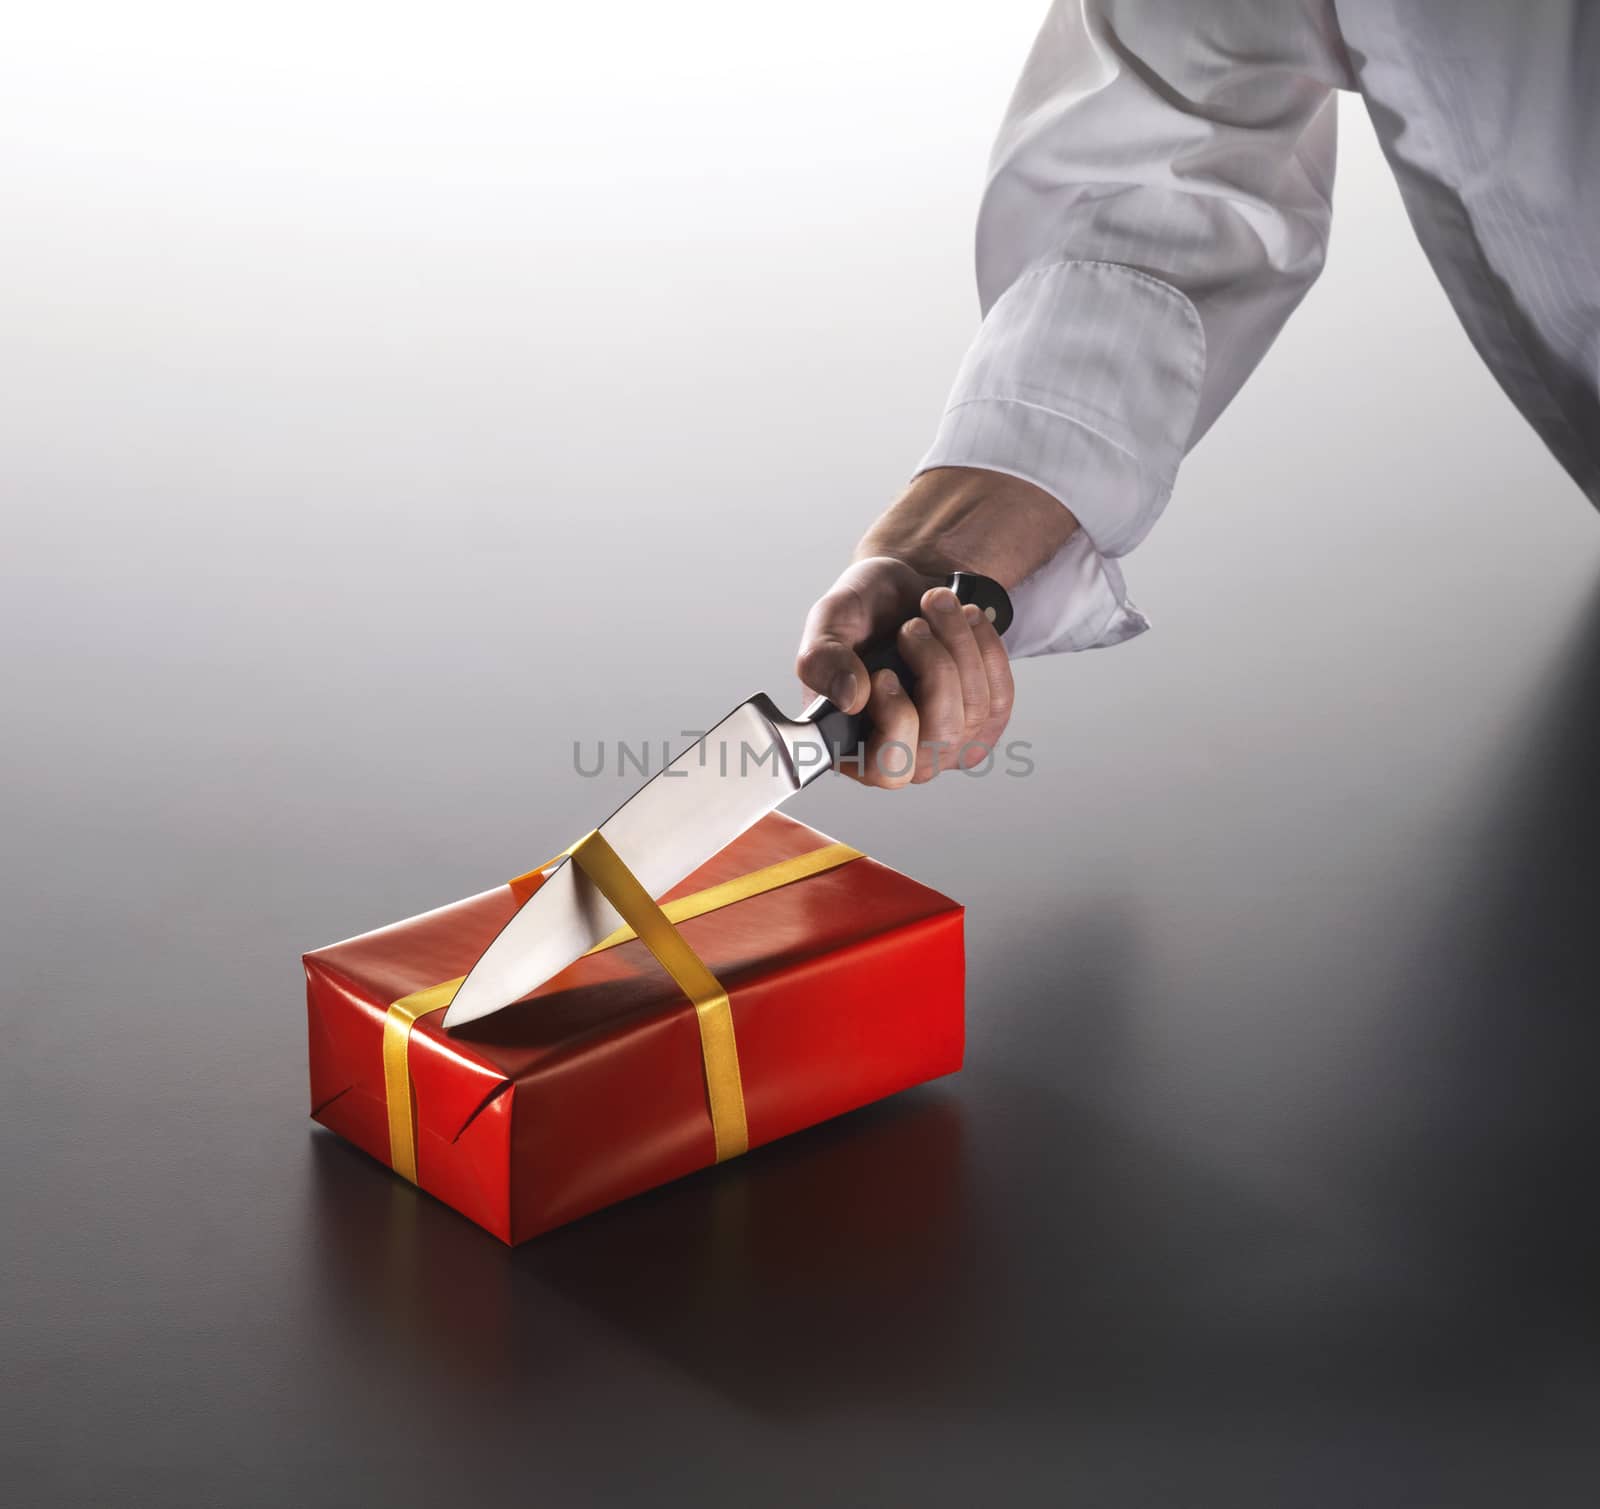 A man opens a birthday or Christmas present with a knife.